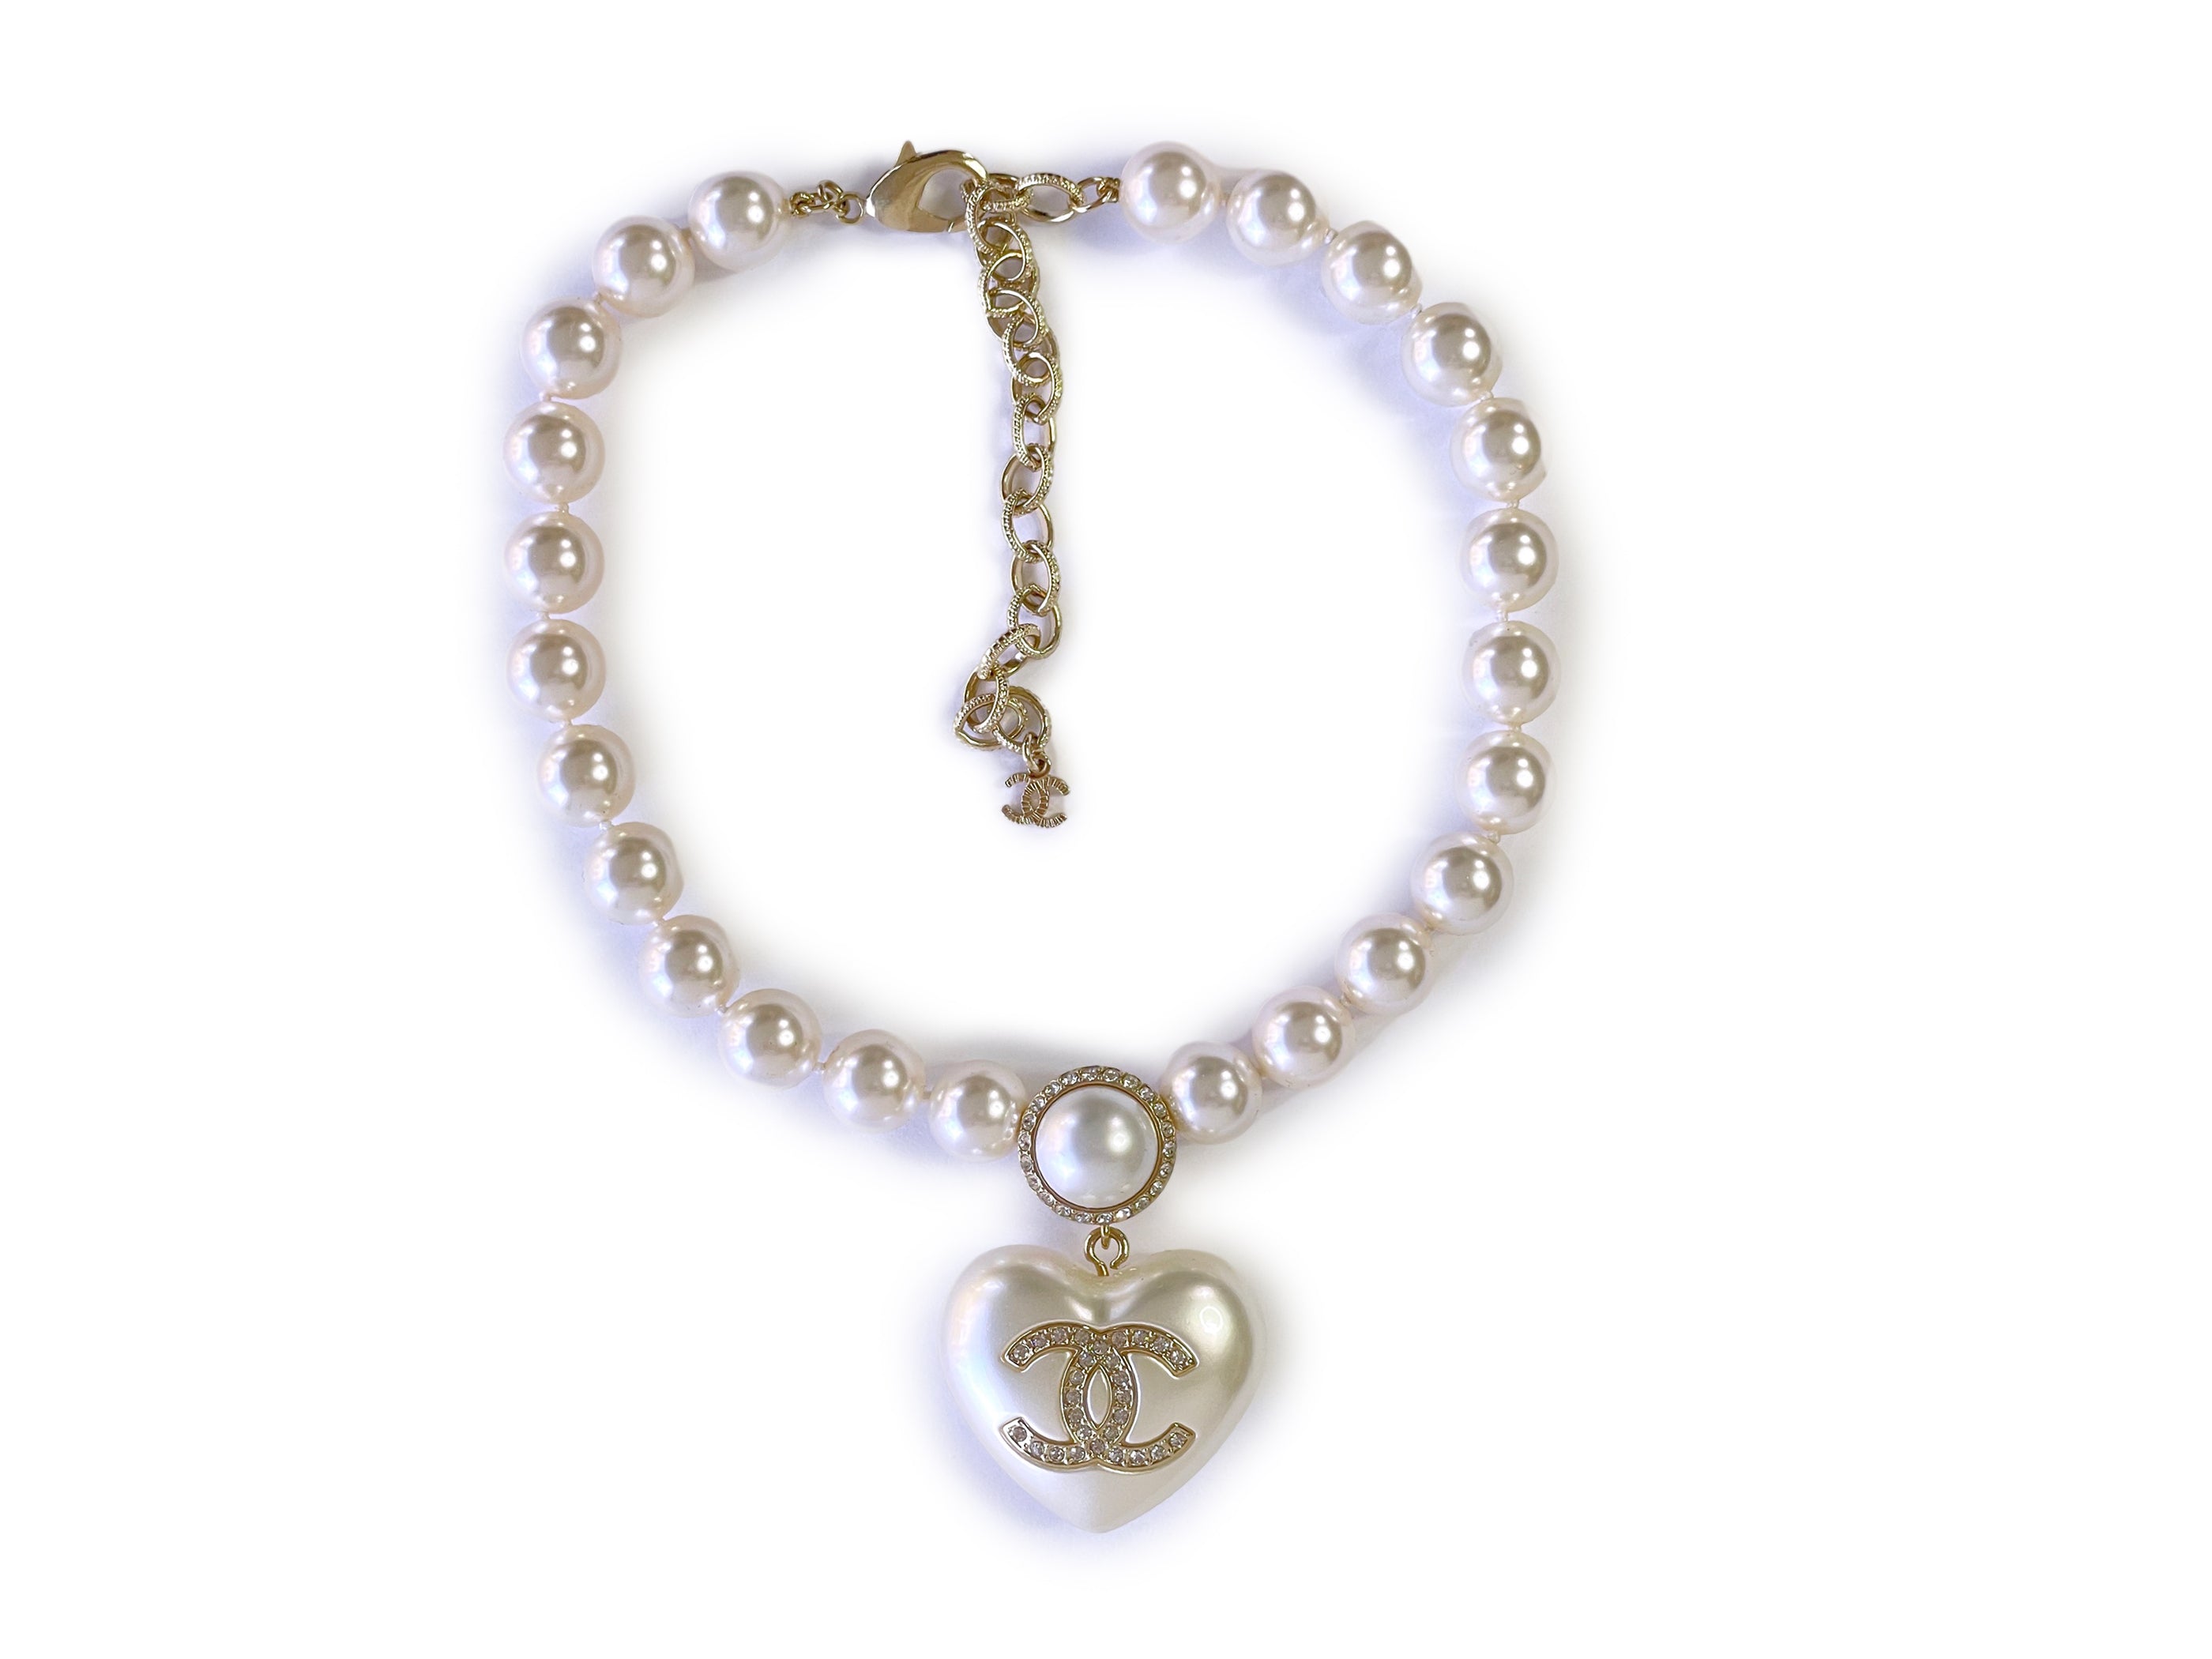 Repurposed Dreamy Chanel Heart Necklace Real Freshwater Pearls